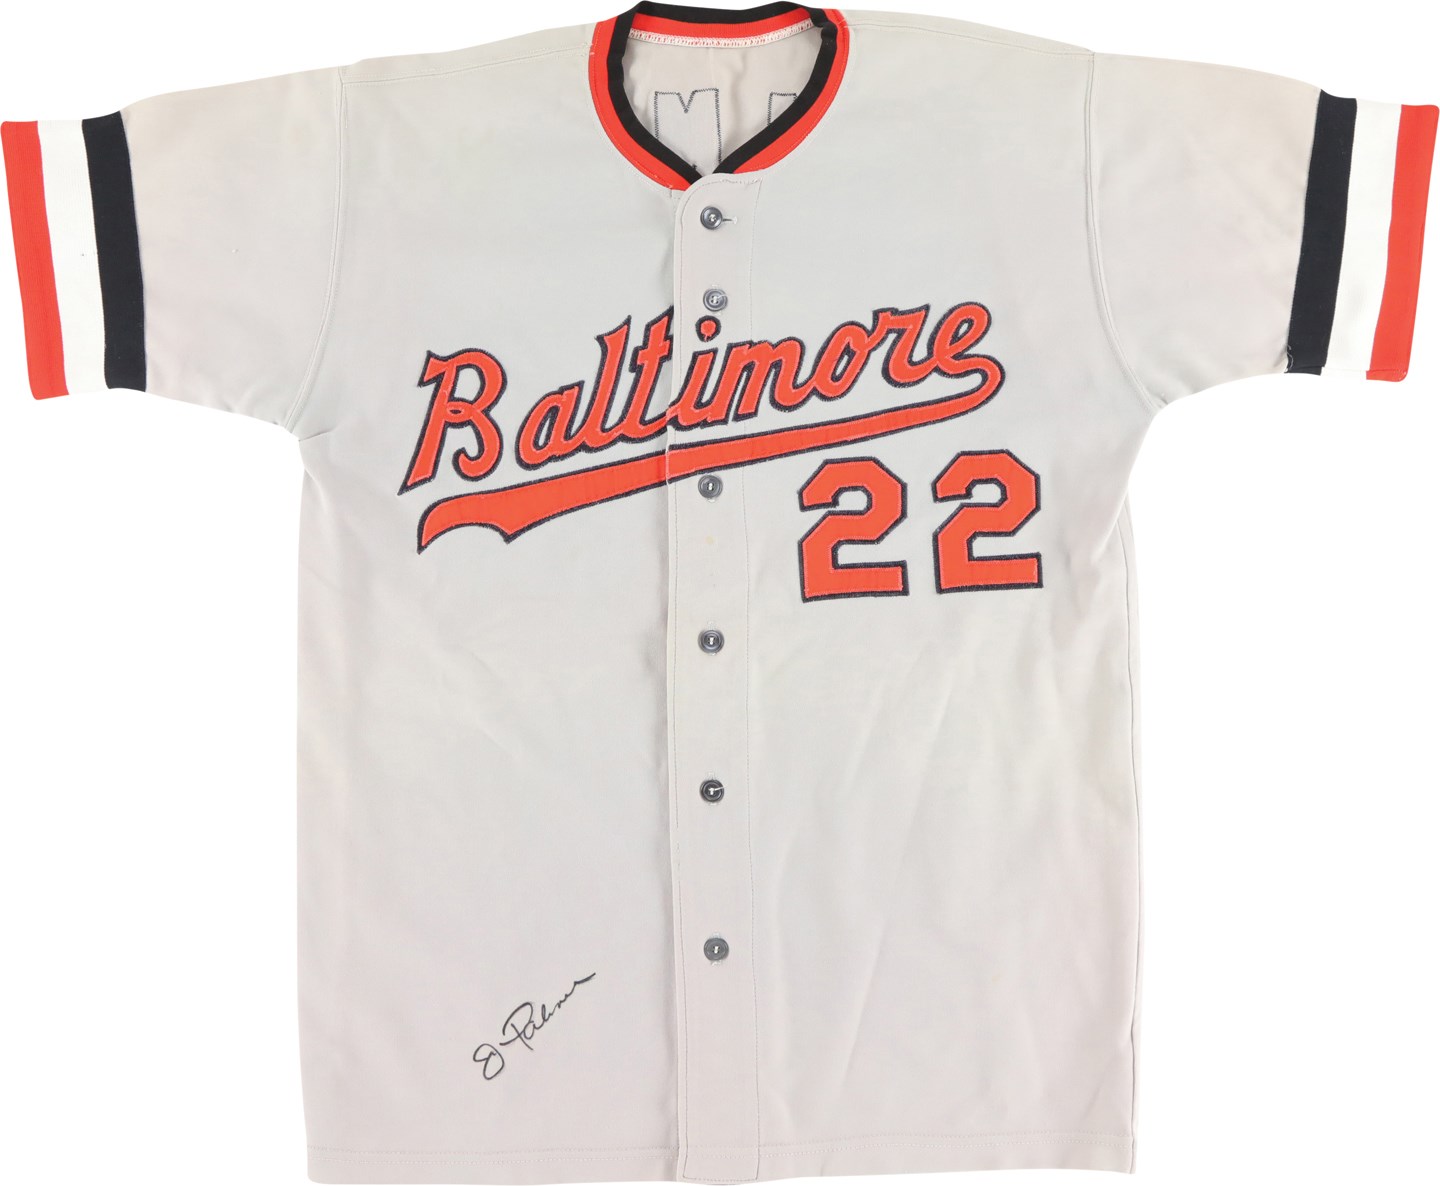 Baseball Equipment - 1972 Jim Palmer Photo-Matched Baltimore Orioles Signed Game Worn Jersey (MEARS  A10 & Photo-Matched)